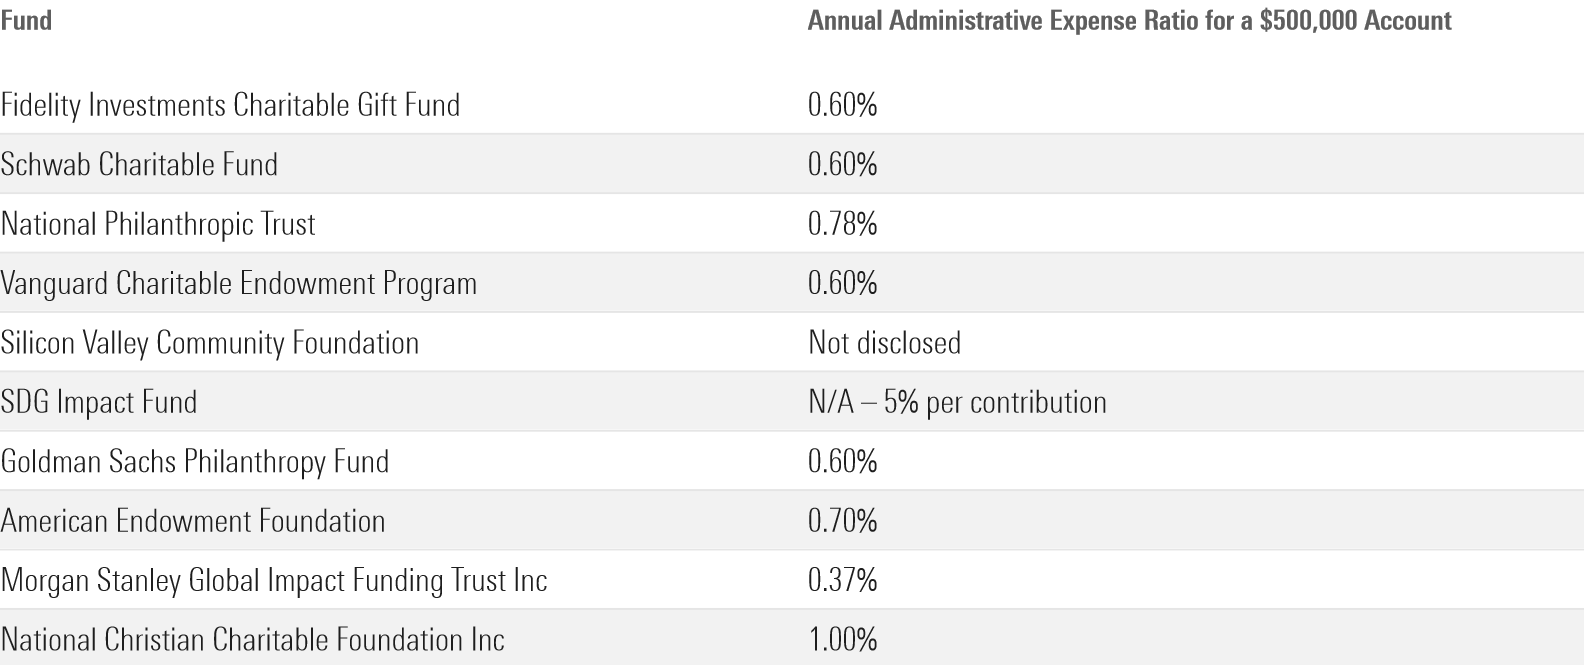 A table showcasing the administrative expenses of the top 10 donor-advised funds by assets.